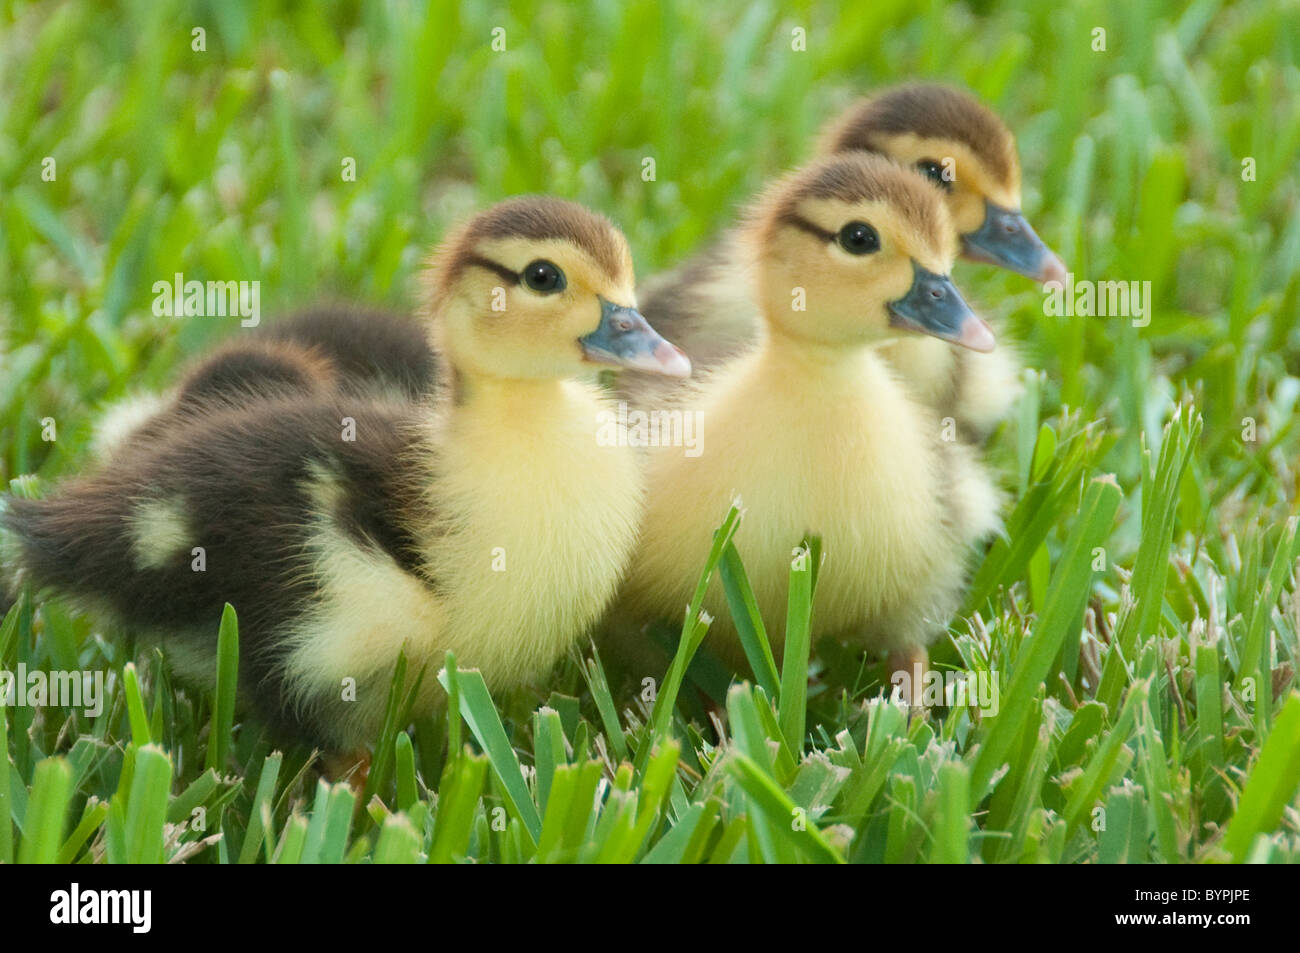 'The Three Little Ducks' - Muscovy ducklings Stock Photo